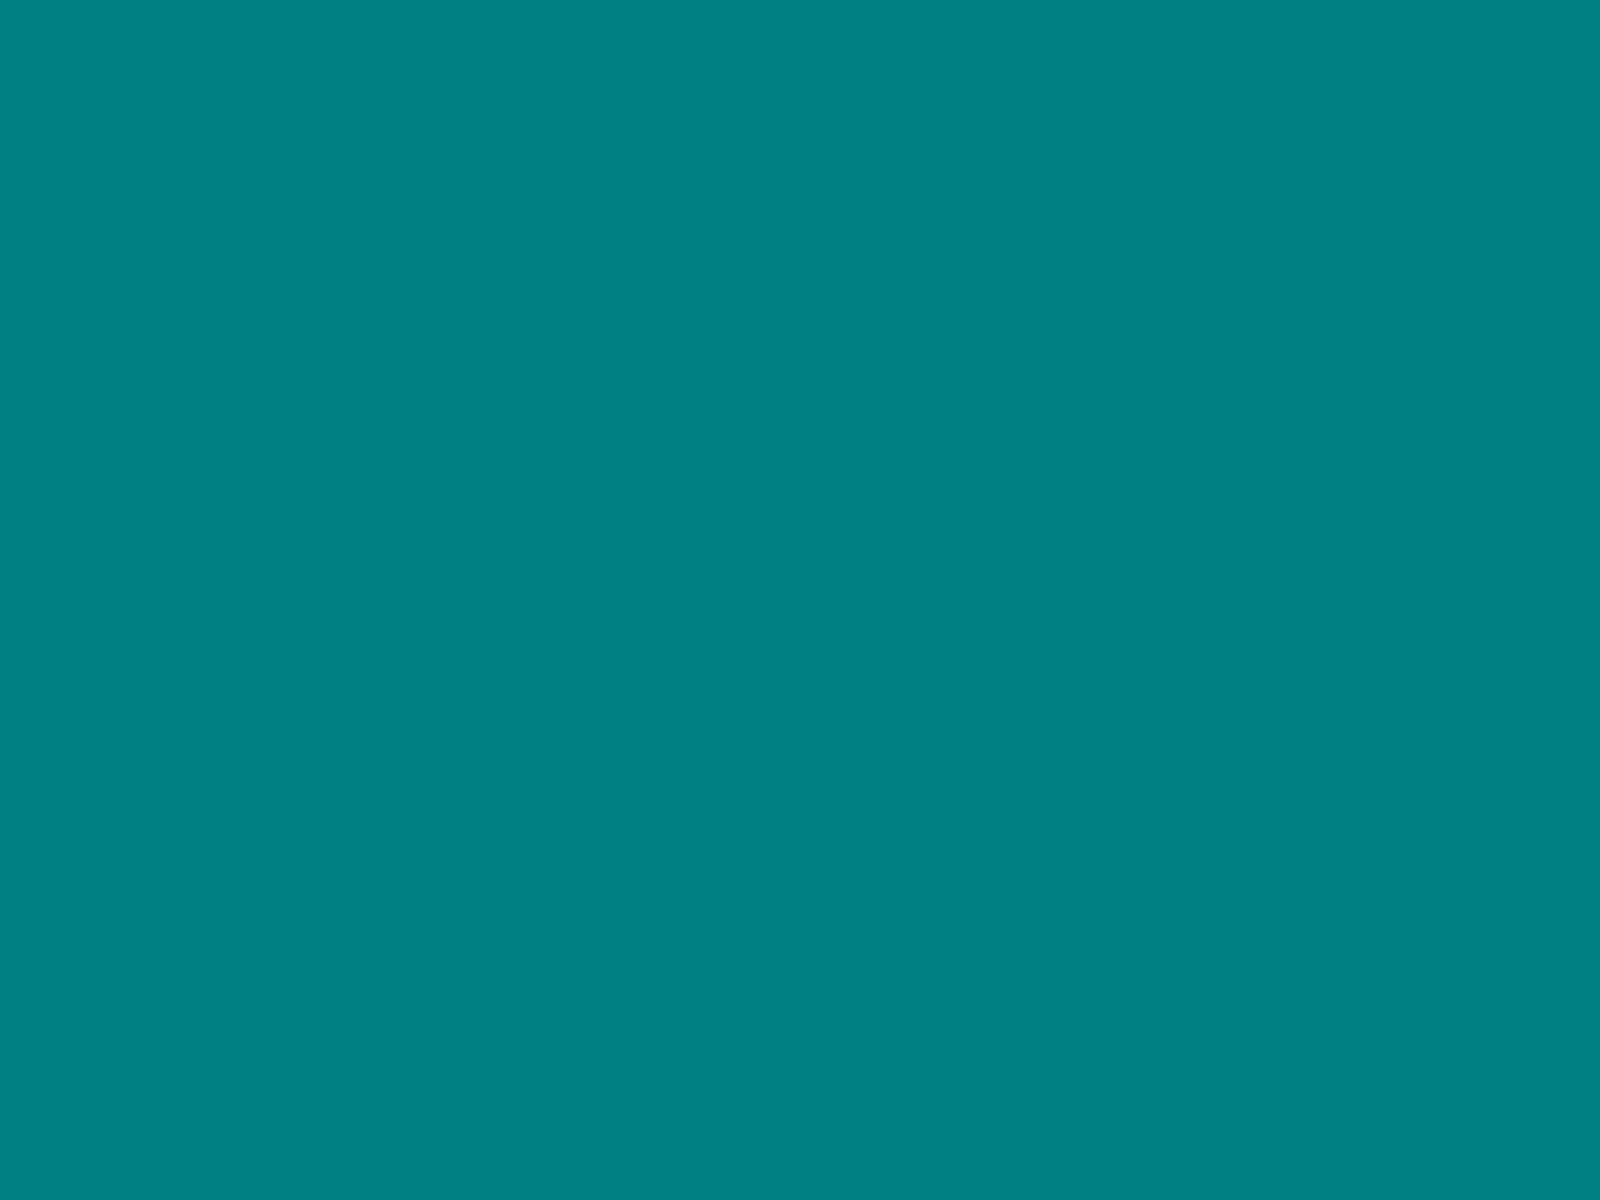 1600x1200 Teal Solid Color Background